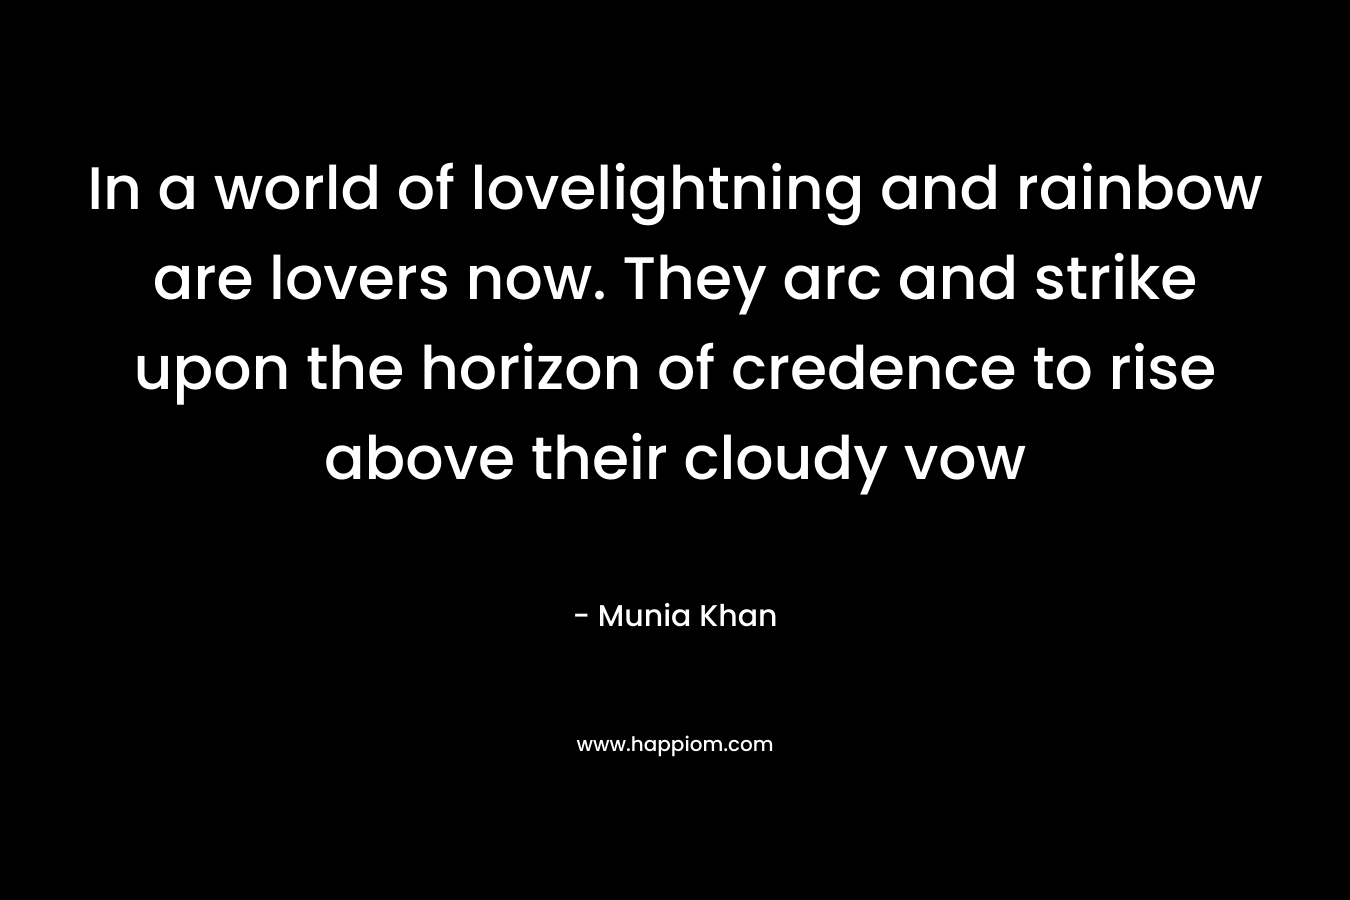 In a world of lovelightning and rainbow are lovers now. They arc and strike upon the horizon of credence to rise above their cloudy vow